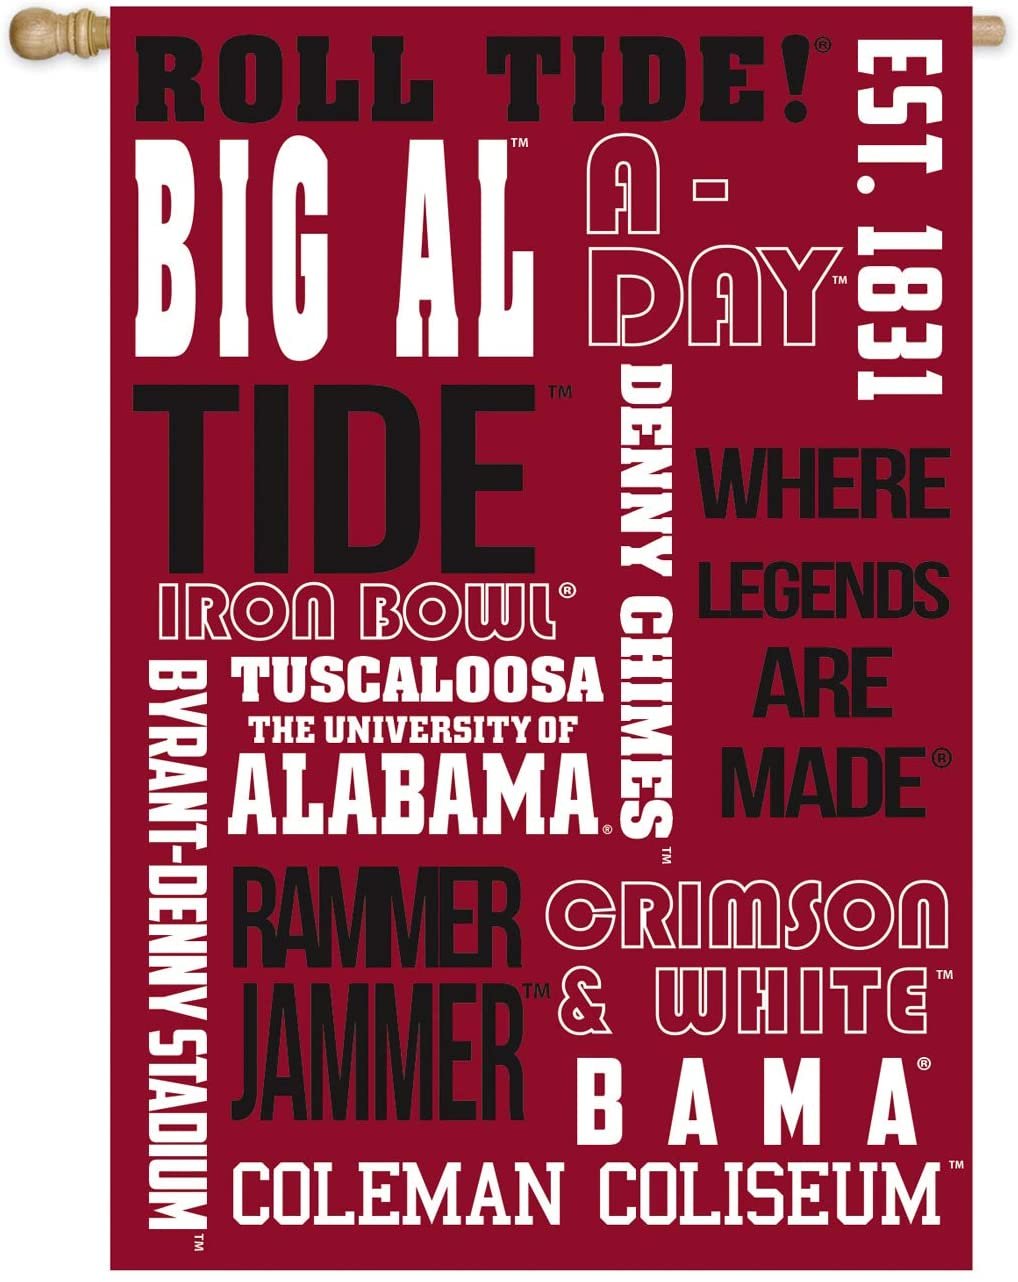 University of Alabama Crimson Tide Fan Premium Double Sided Banner Flag, Fan Rules Design, 28 x 44 Inches